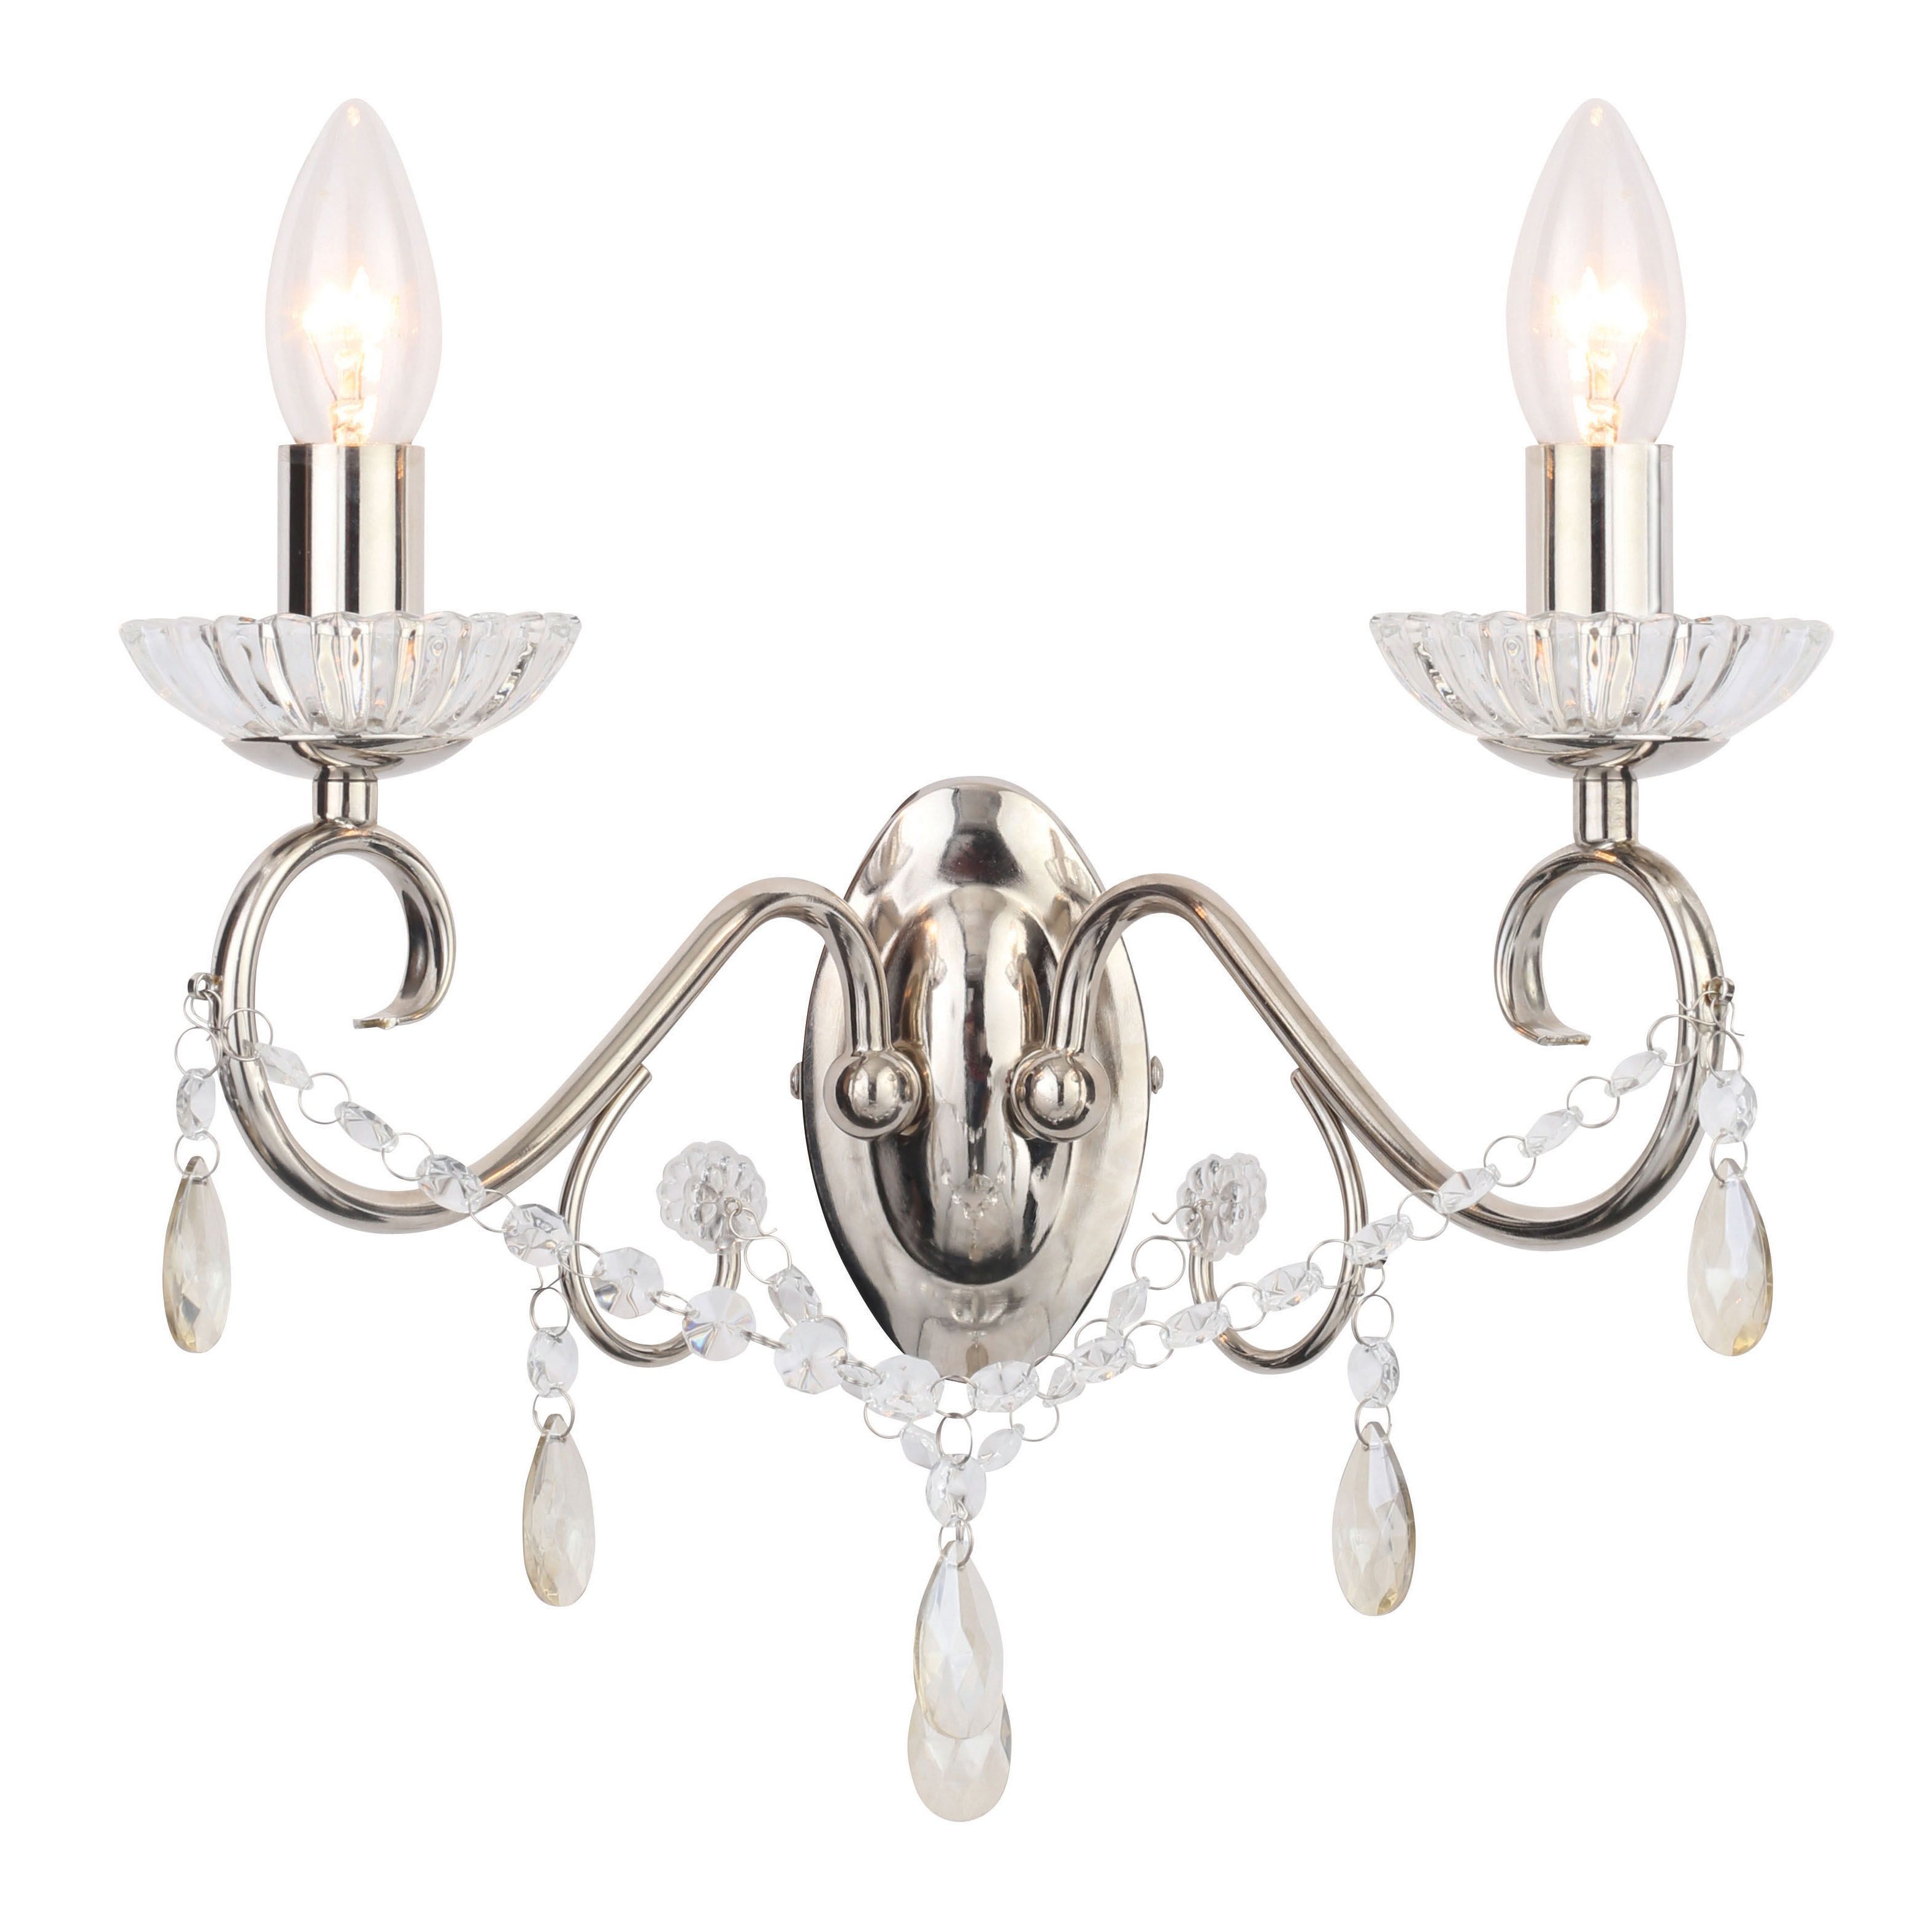 Chesworth Nickel effect Double Wall light